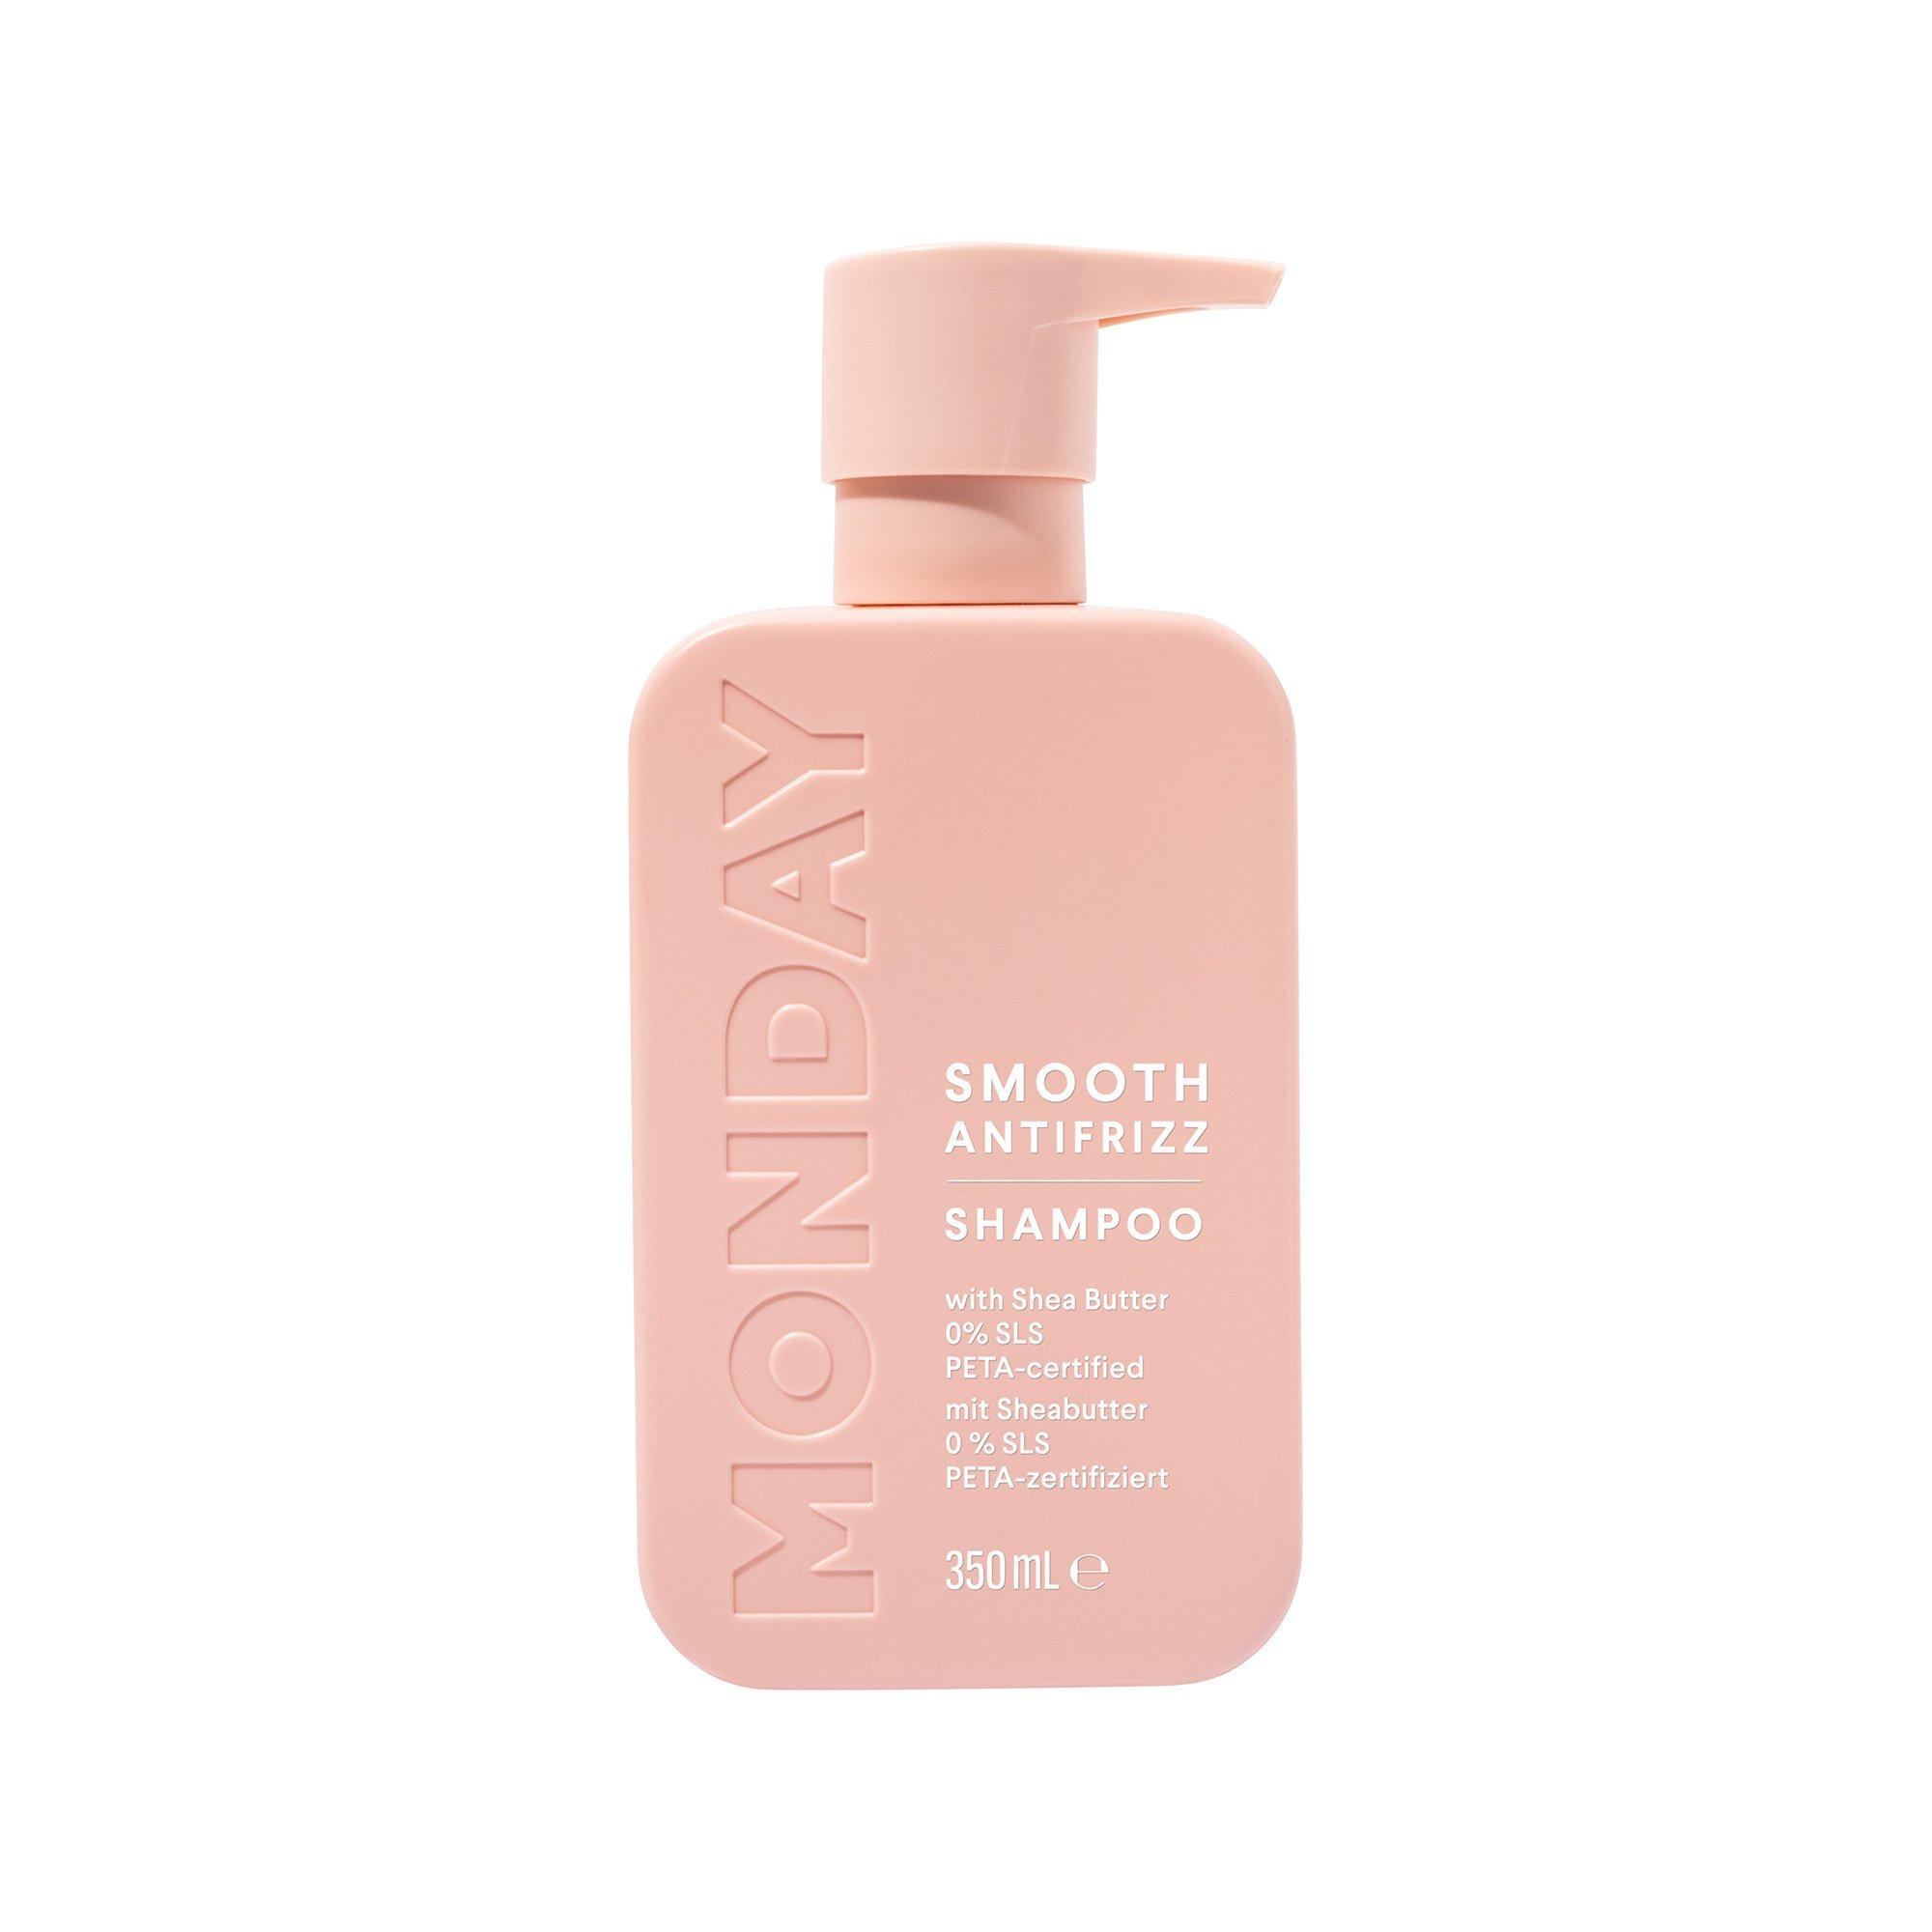 MONDAY HAIRCARE Smooth Shampoo Geschmeidig Shampoo Mit Sheabutter 